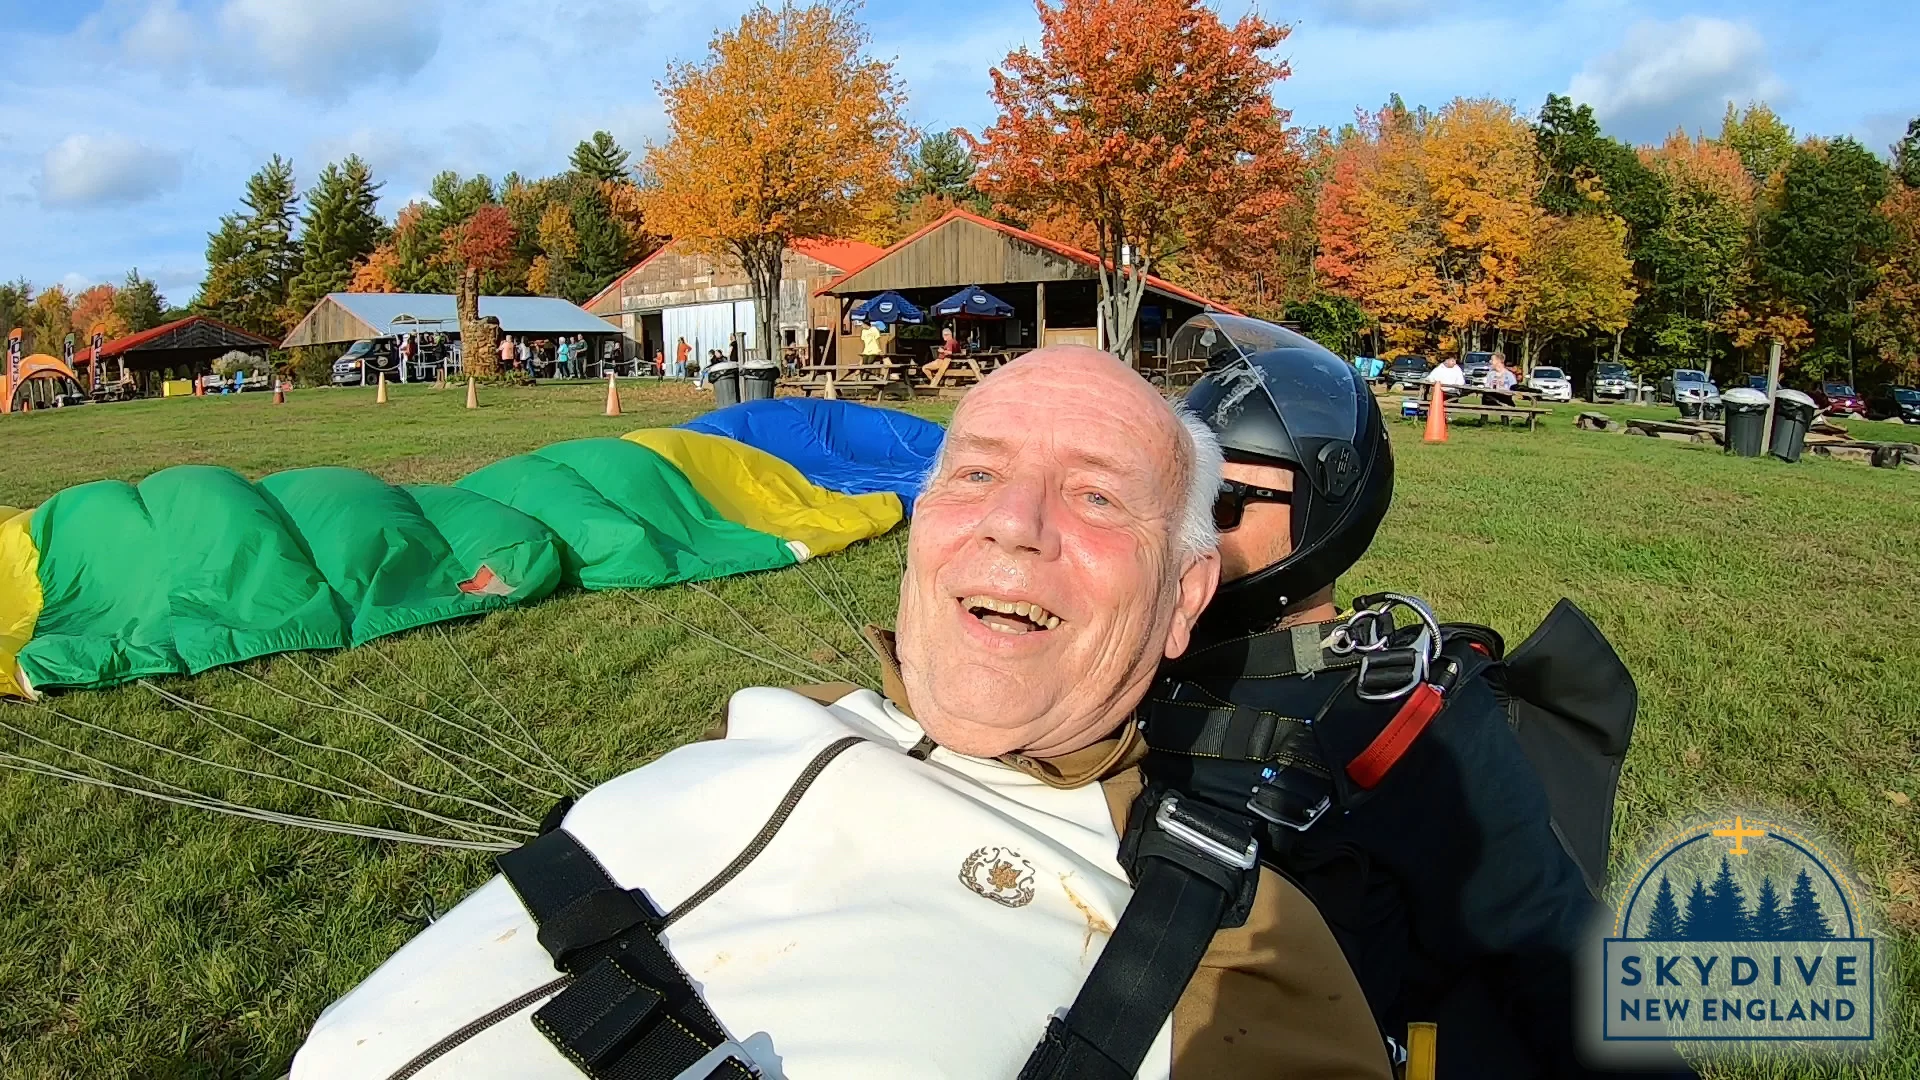 Gene Clough, lecturer emeritus in geology and physics, smiles after completed his tandem skydive at SkyDive New England in Lebanon, Maine, on Oct. 11, 2021 (Photograph courtesy Shred Video)